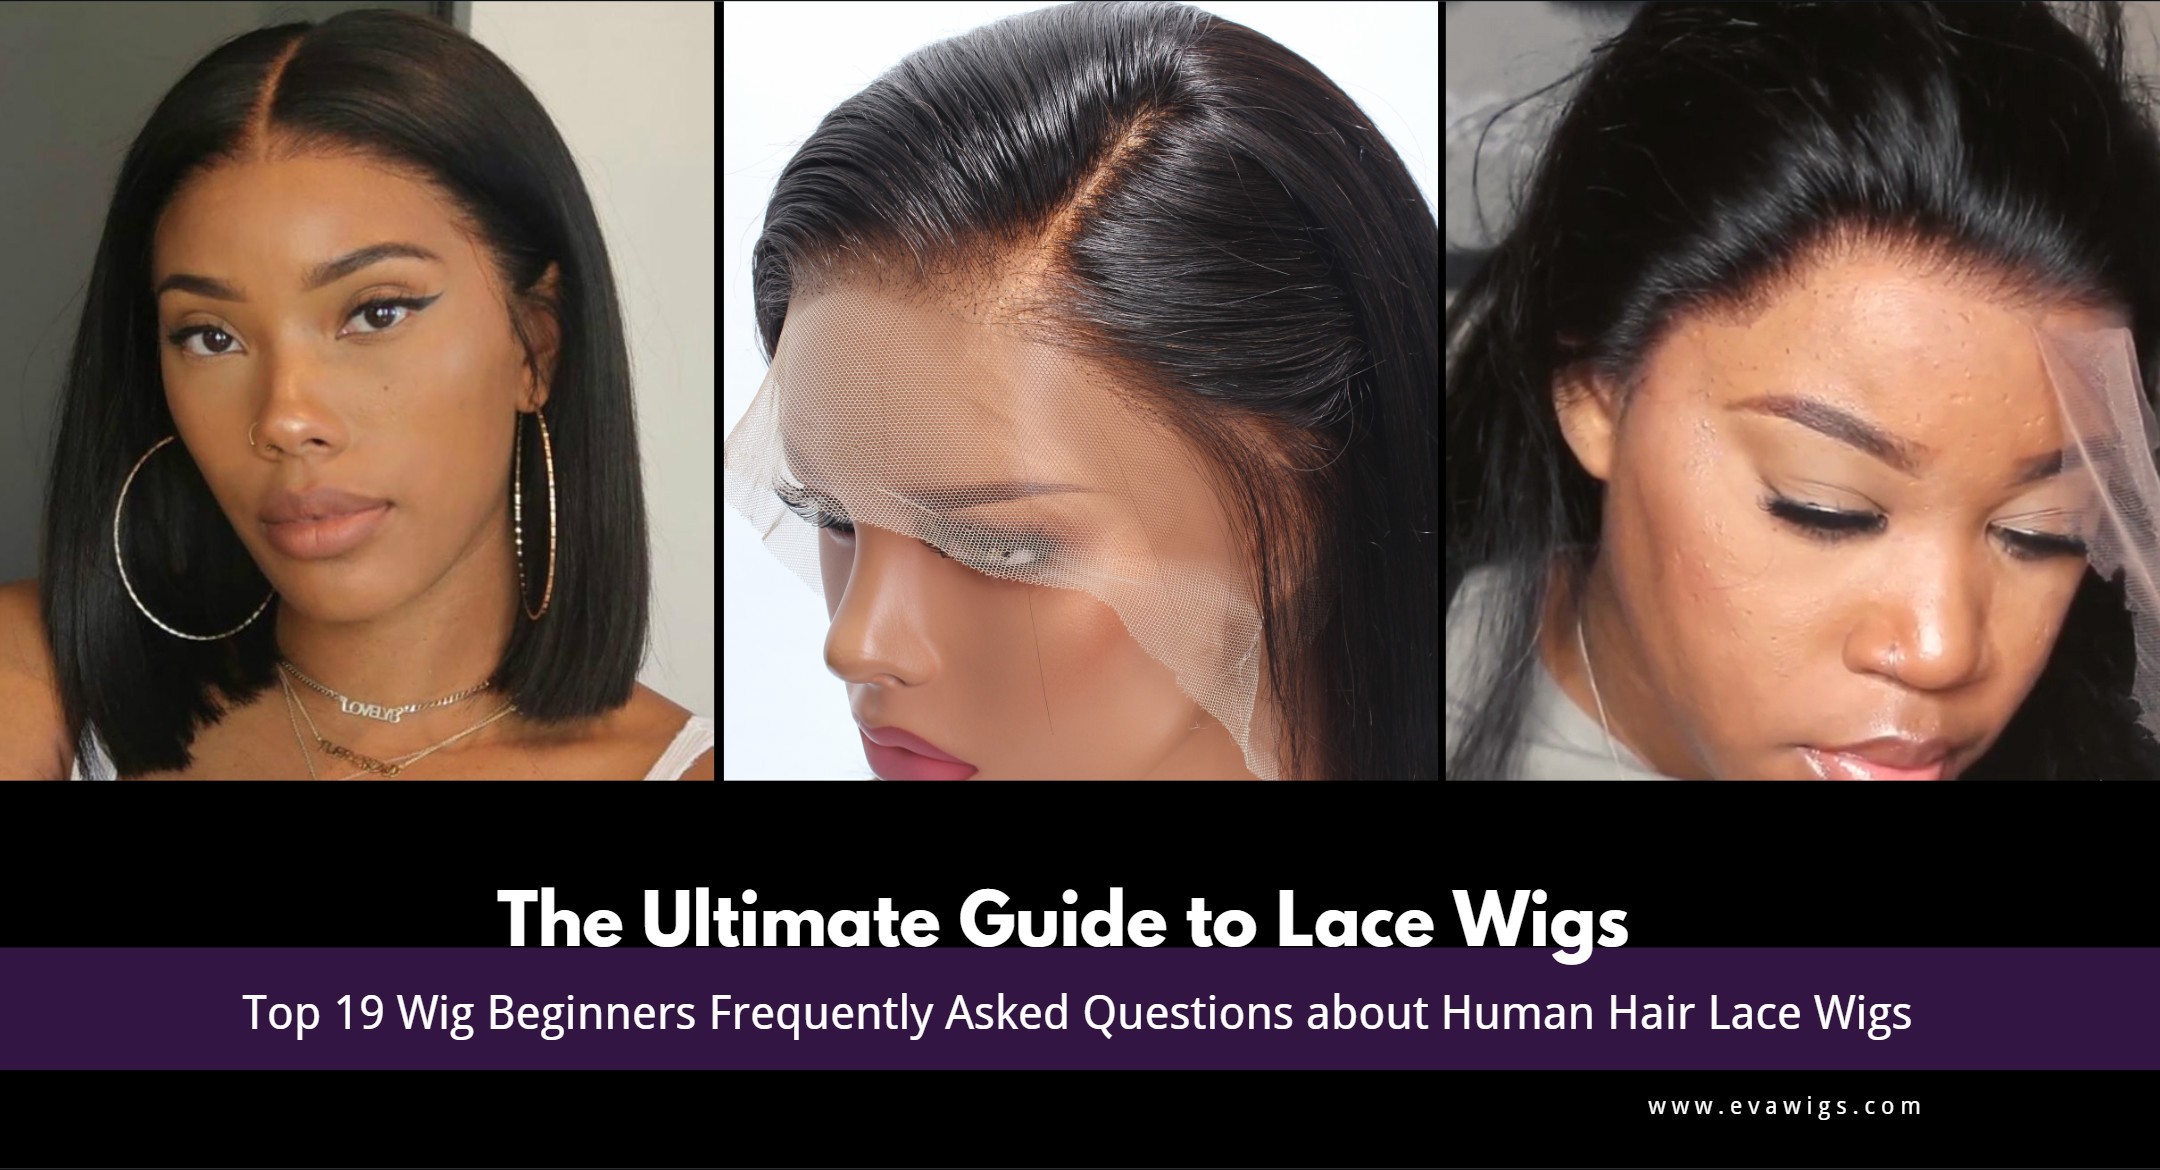 The Ultimate Guide to Lace Wigs -- Top 19 Wig Beginners' Frequently Asked Questions about Human Hair